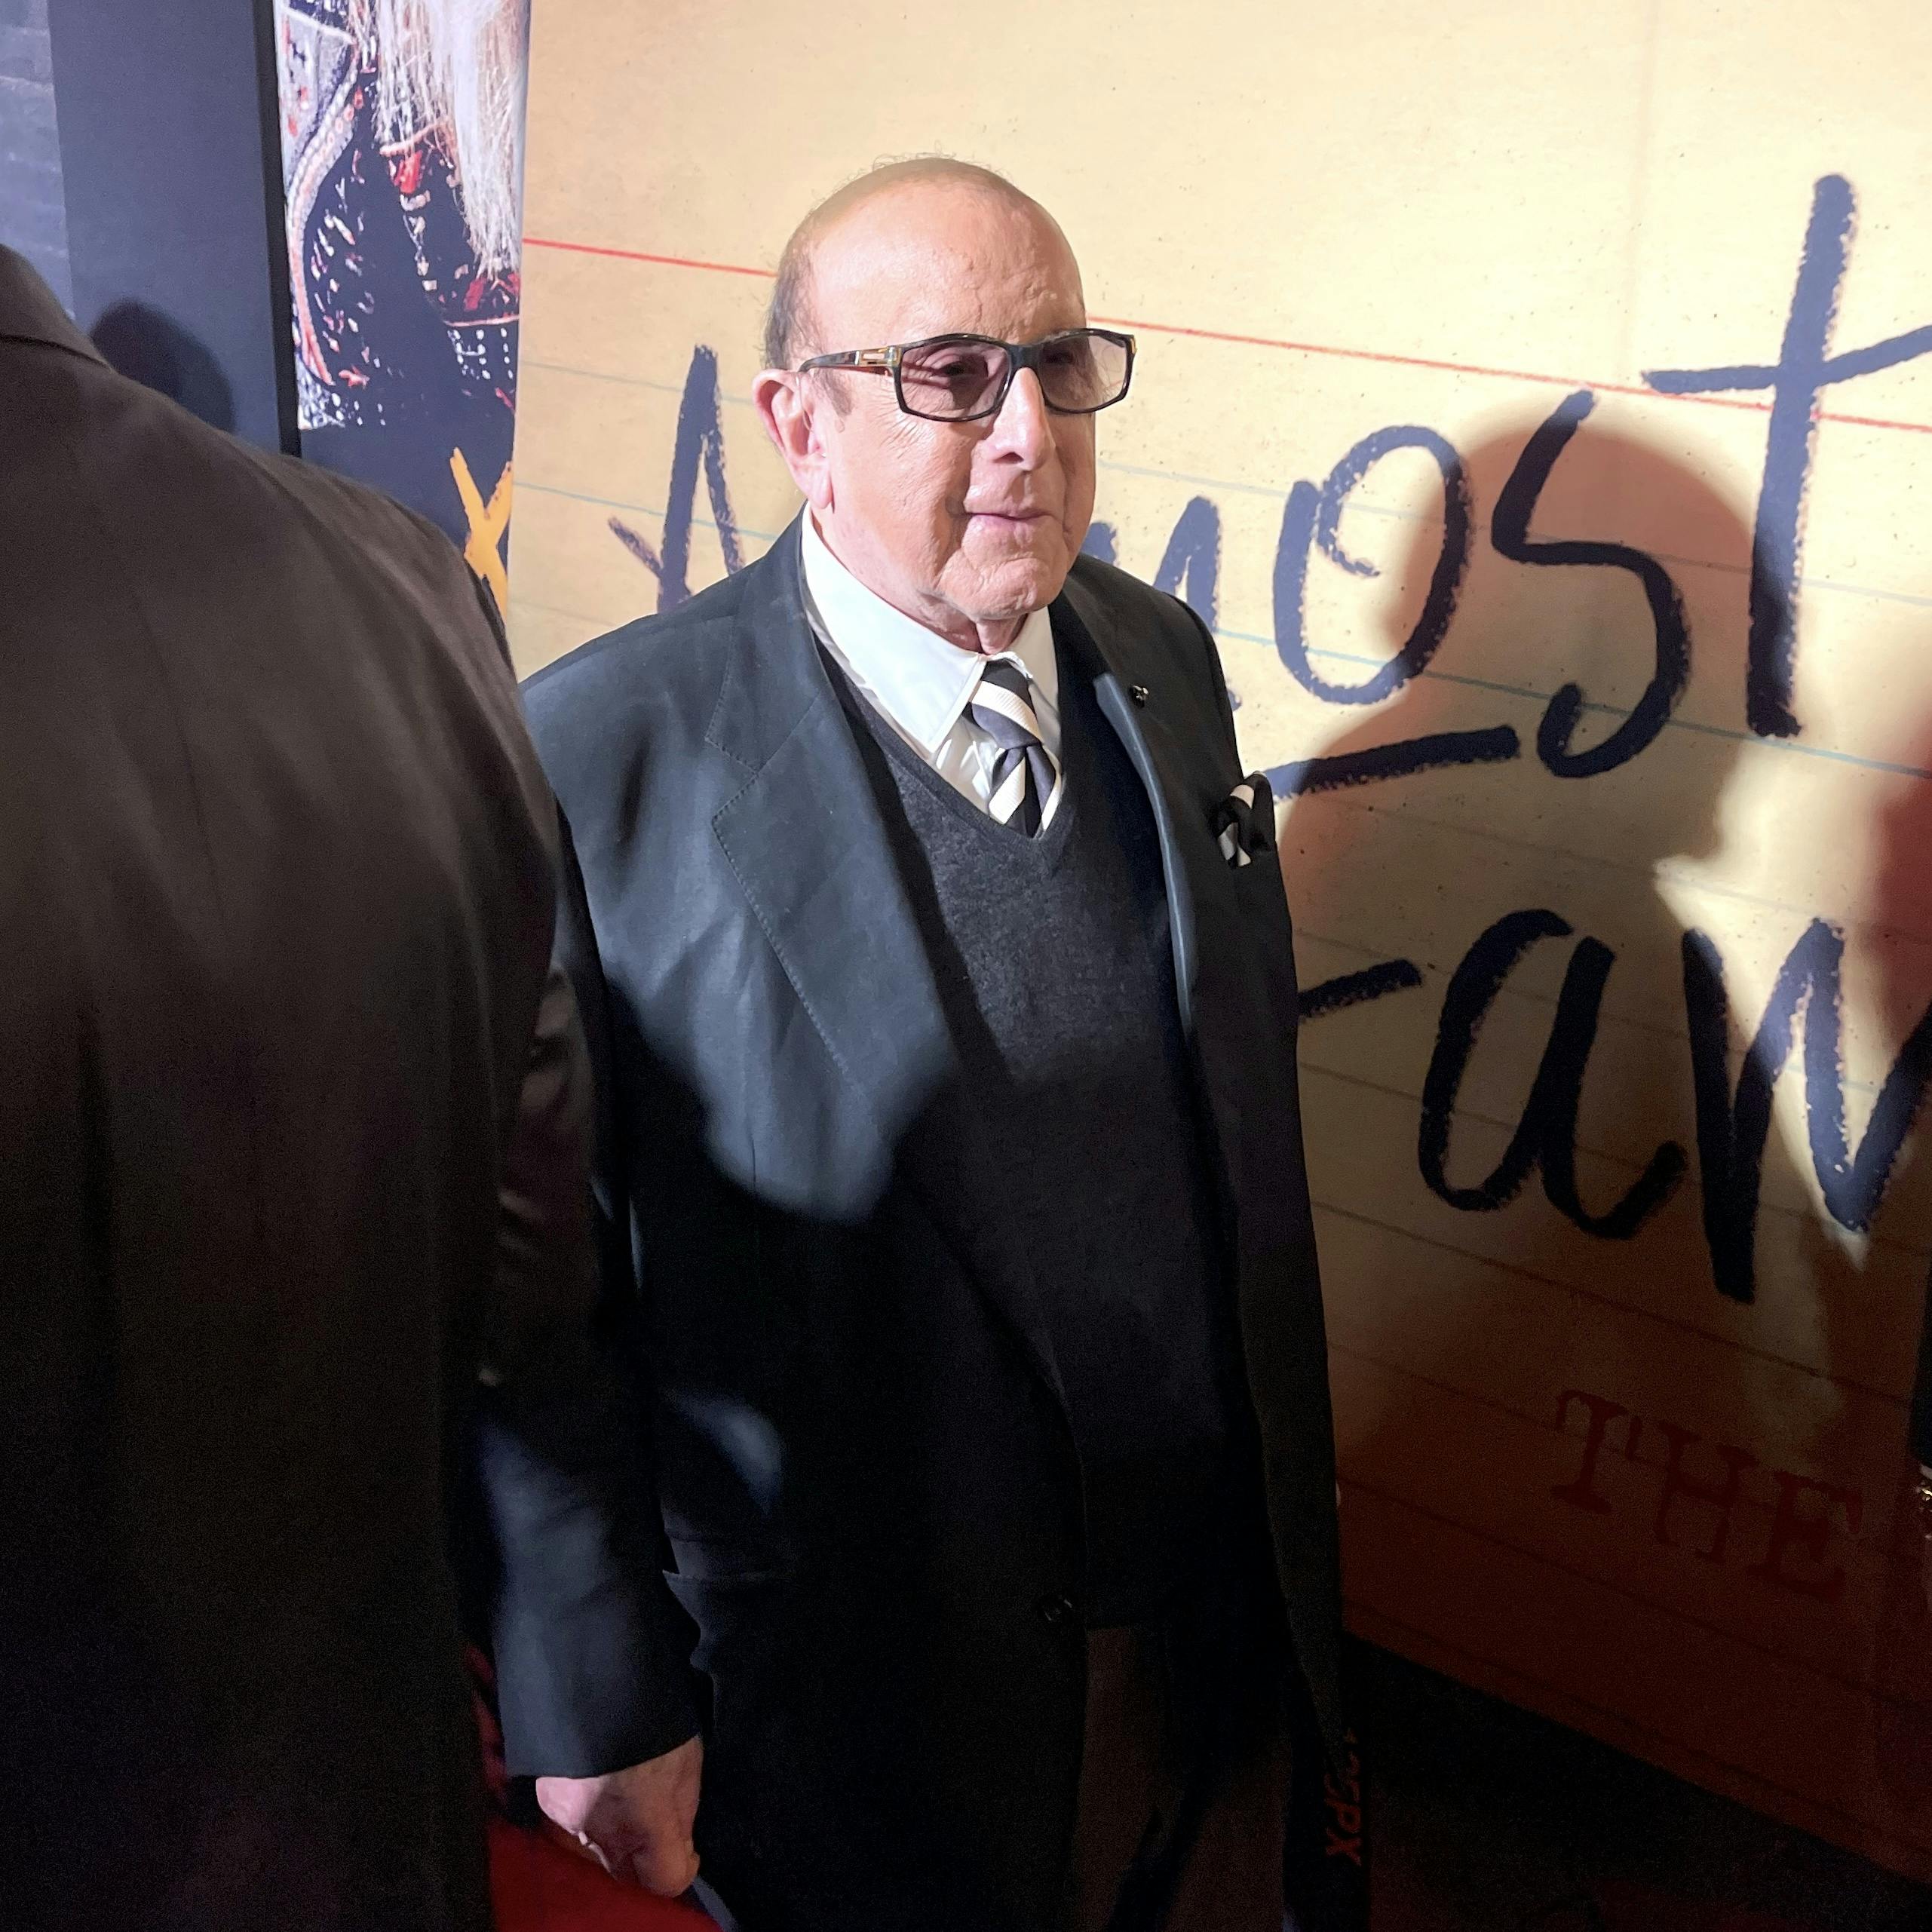 Almost Famous Opening Night - Clive Davis